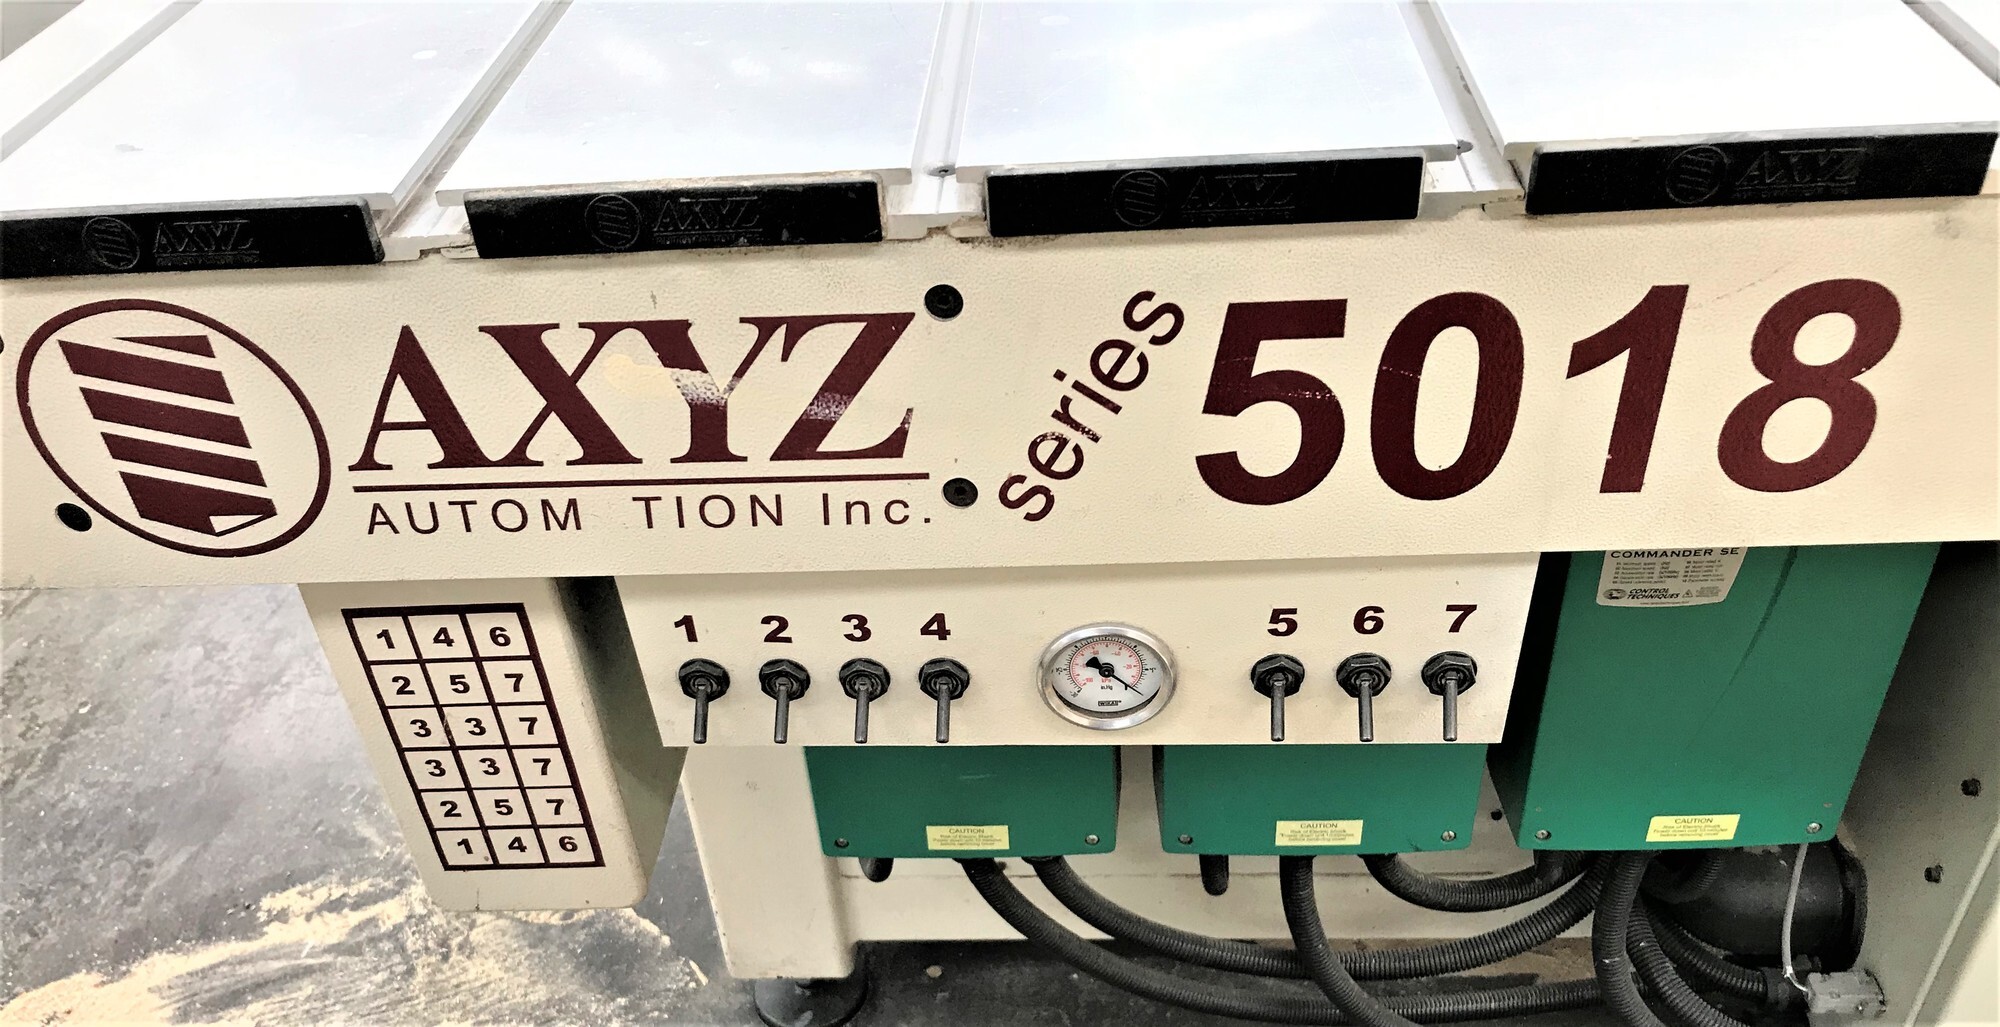 2007 AXYZ 5018 Used 3 Axis CNC Routers | CNC Router Store